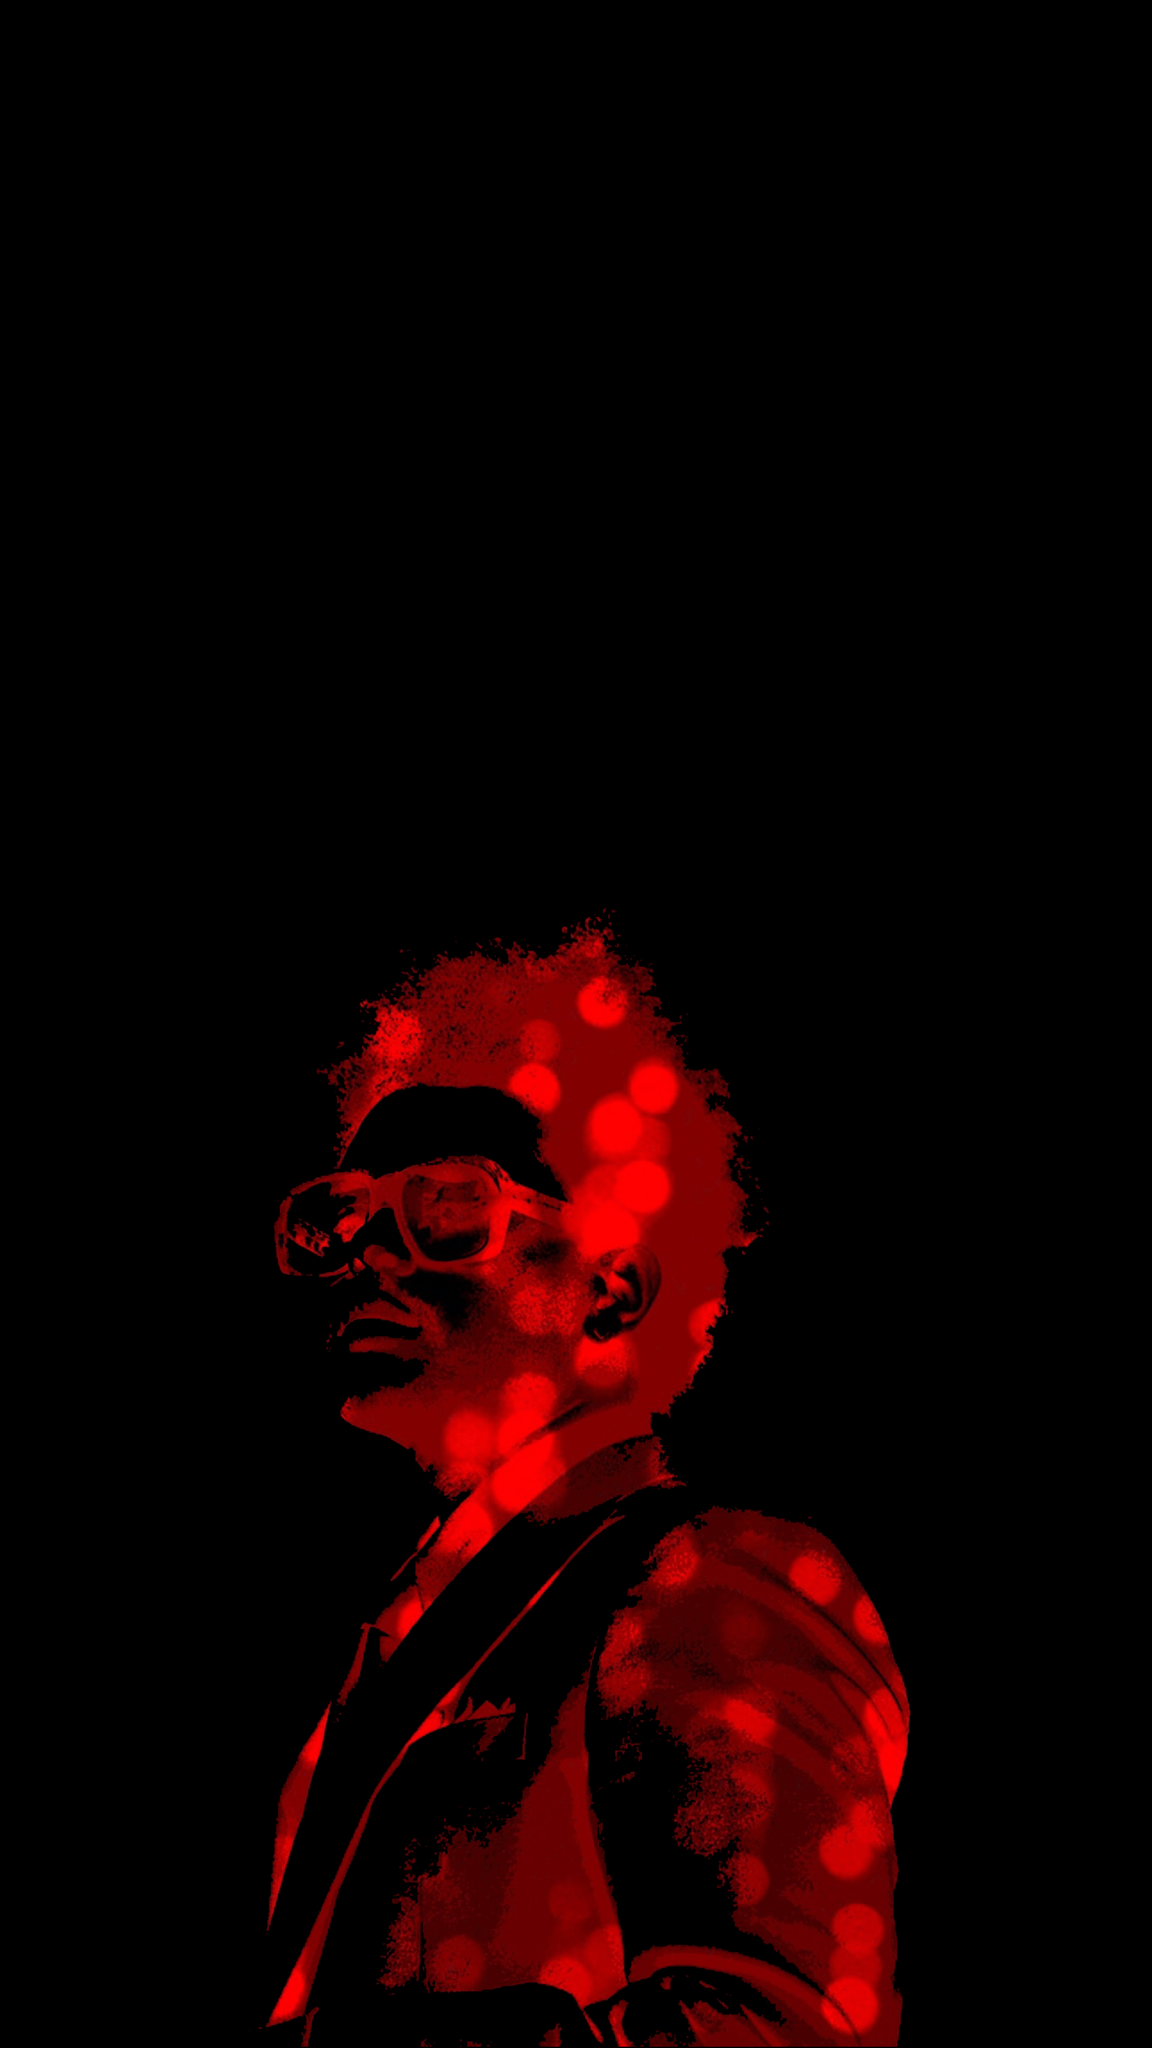 16575 Image about red in The Weeknd Phone Wallpaper  Android  iPhone  HD Wallpaper Background Download HD Wallpapers Desktop Background   Android  iPhone 1080p 4k 1080x1920 2023